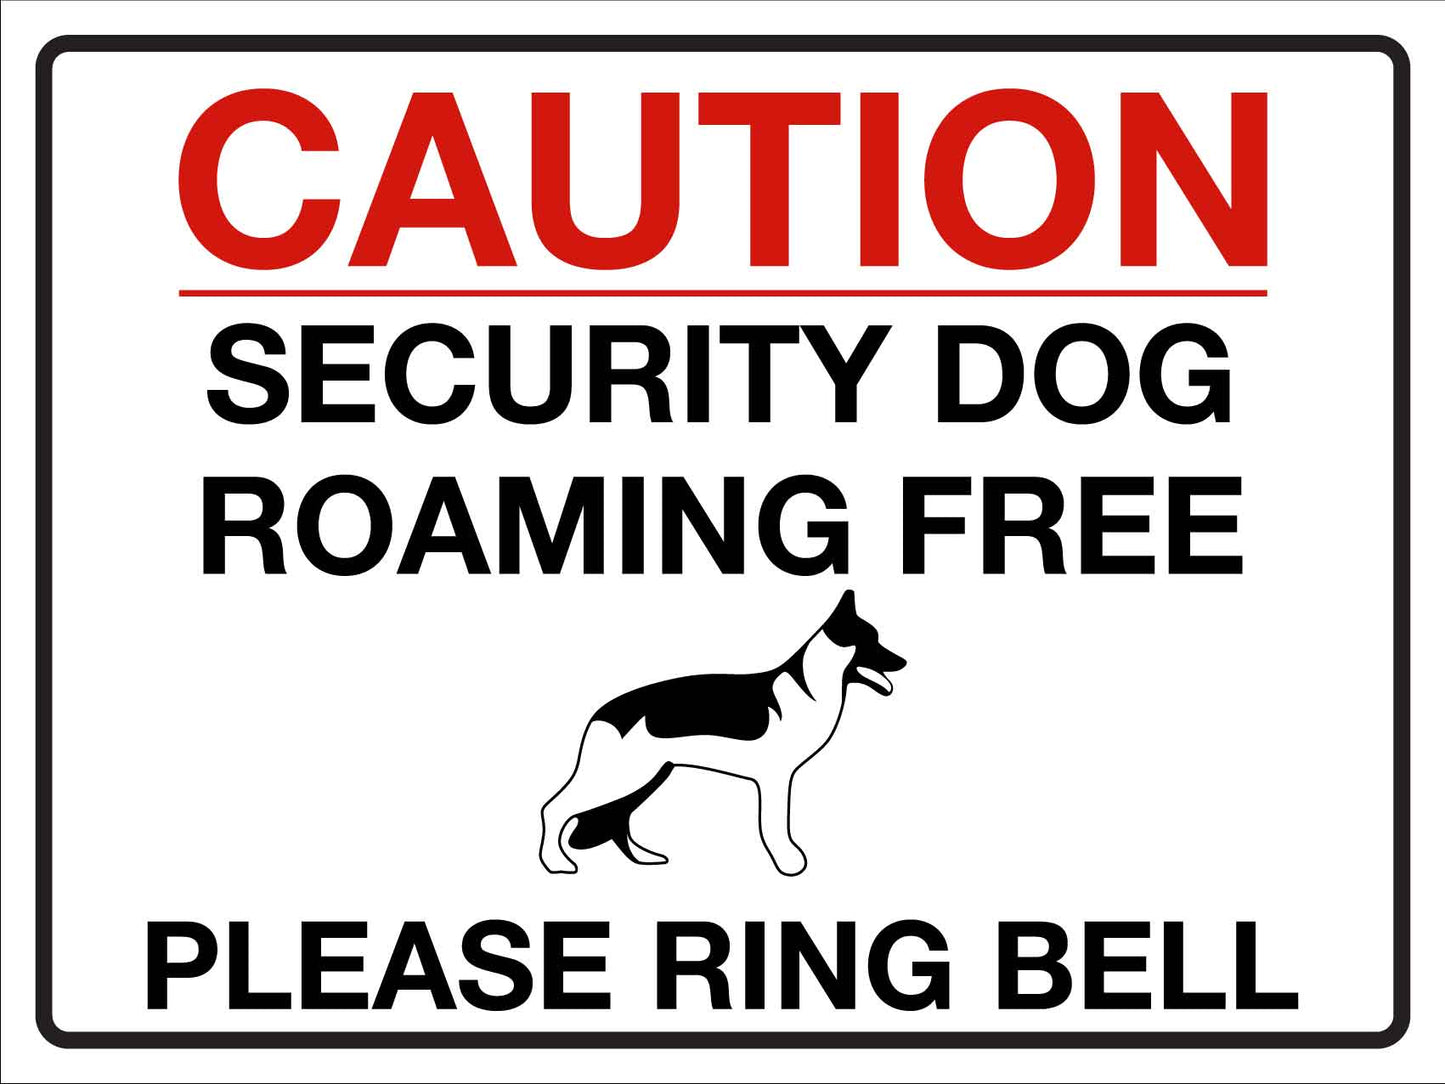 Caution Security Dog Roaming Free Please Ring Bell Sign